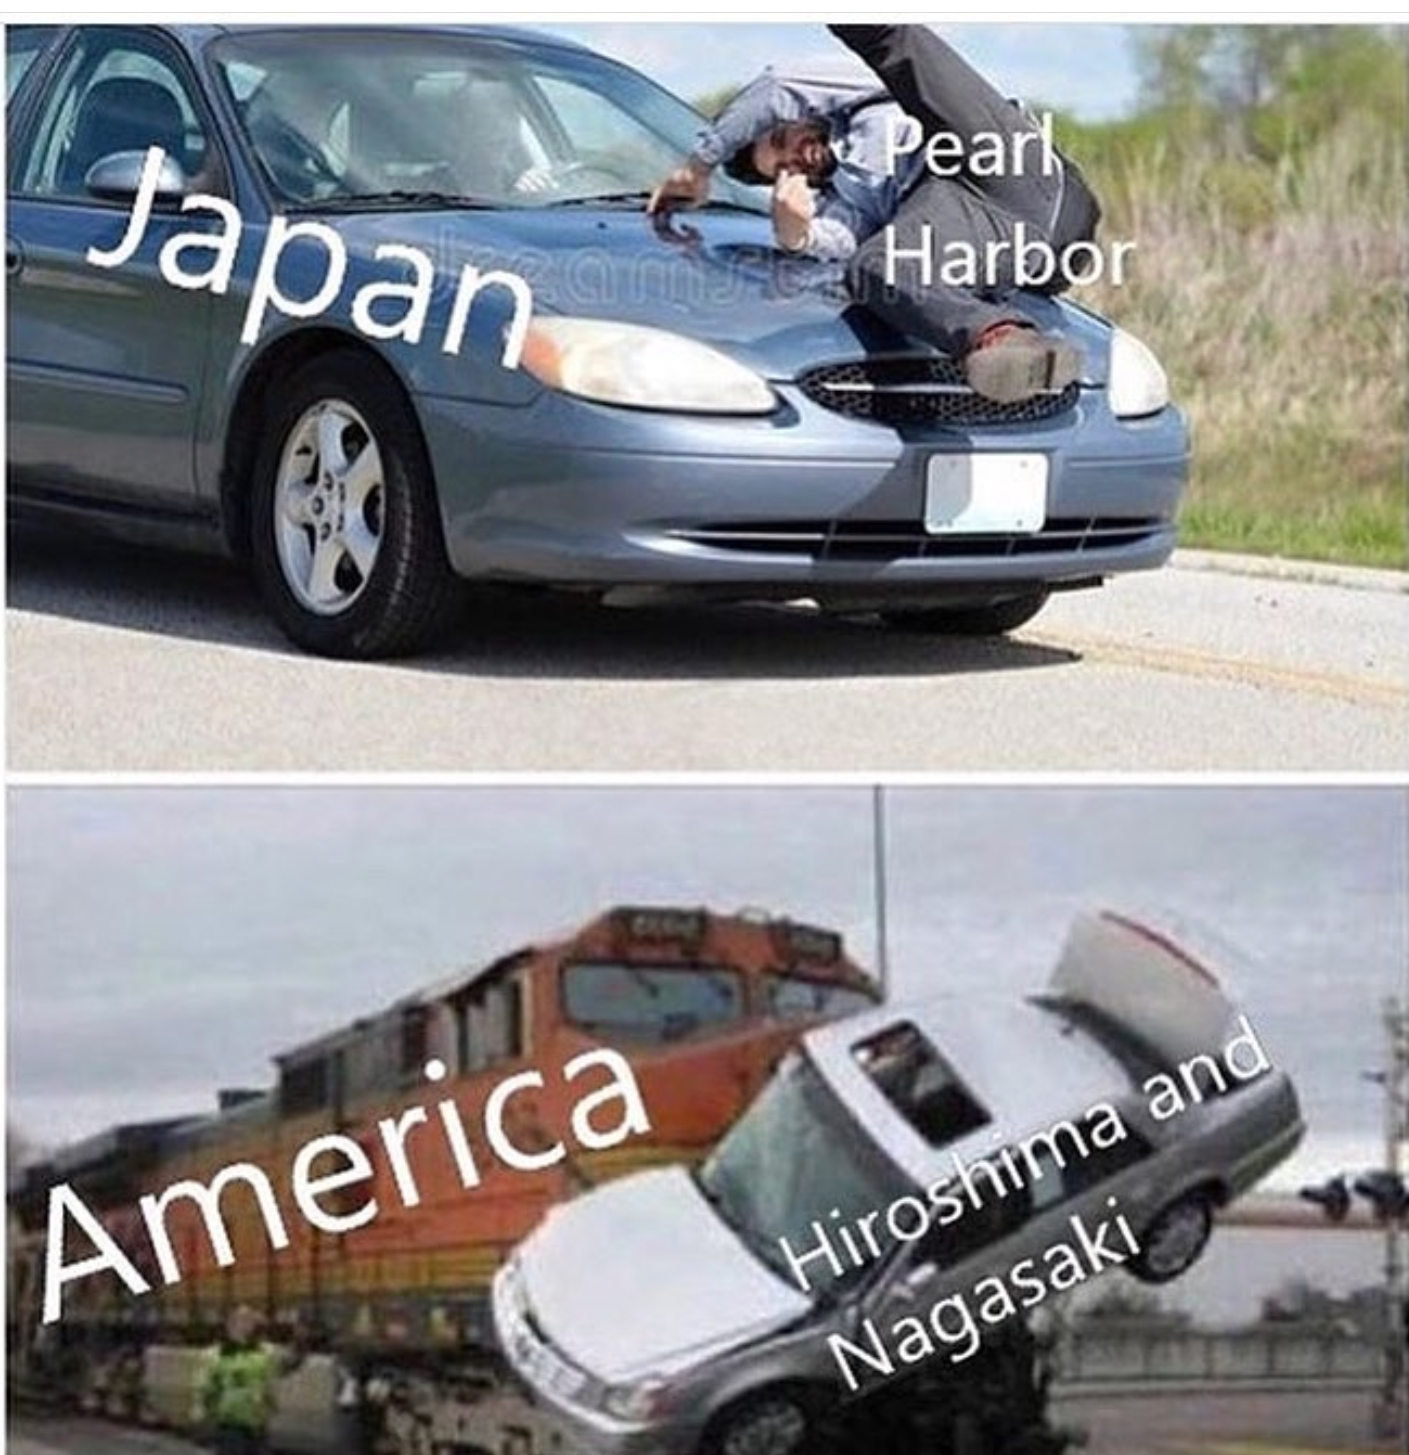 Offensive meme of a man getting hit by a car and then a car getting hit by a train